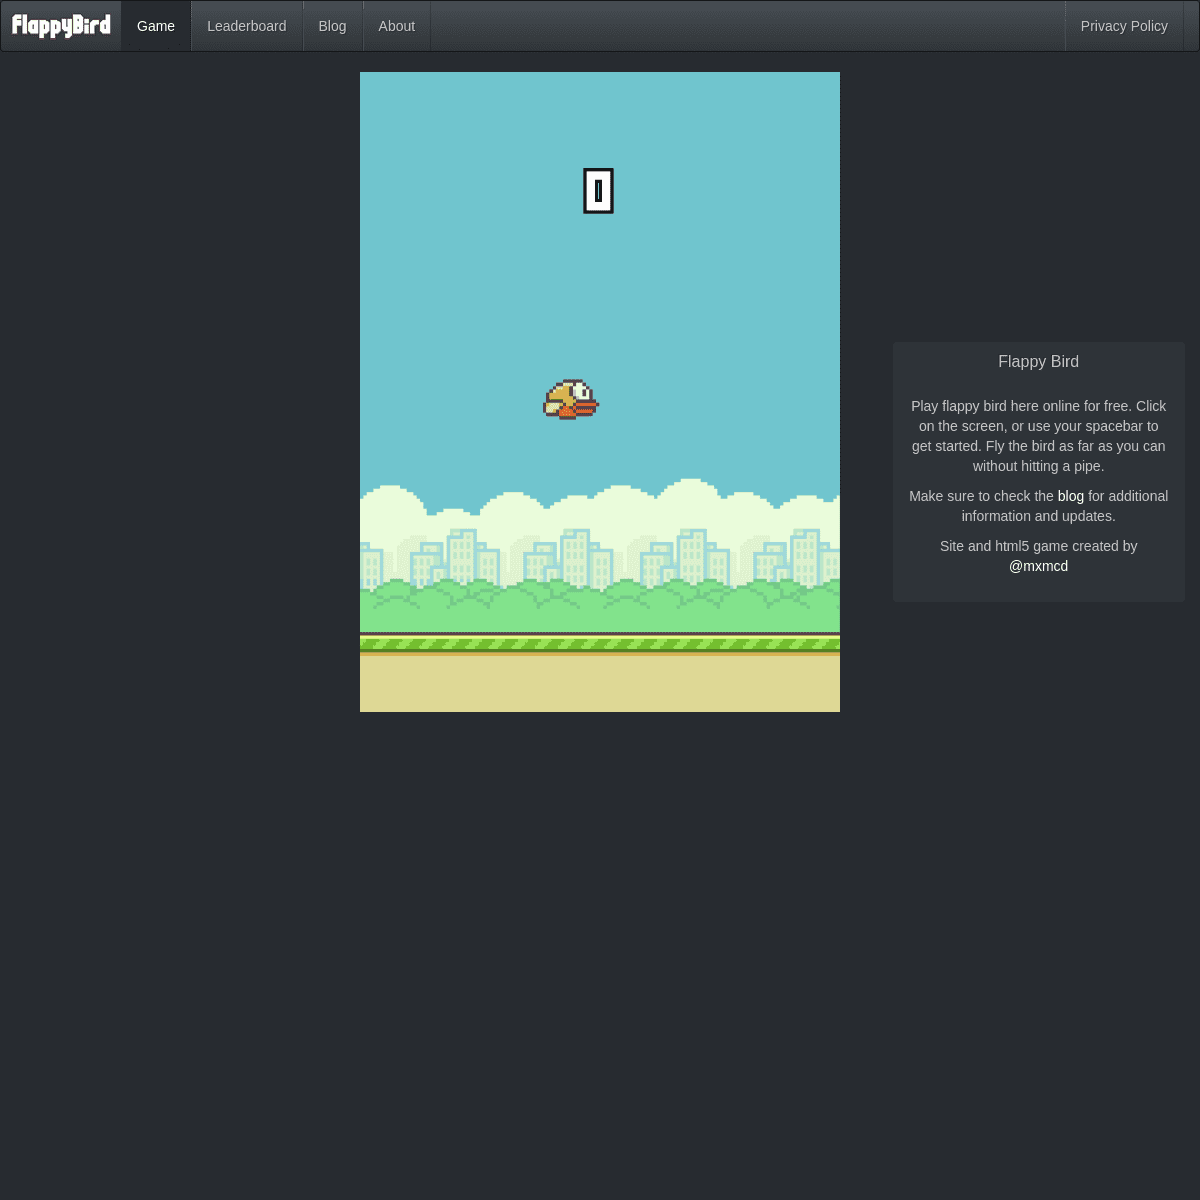 A complete backup of https://flappybird.io